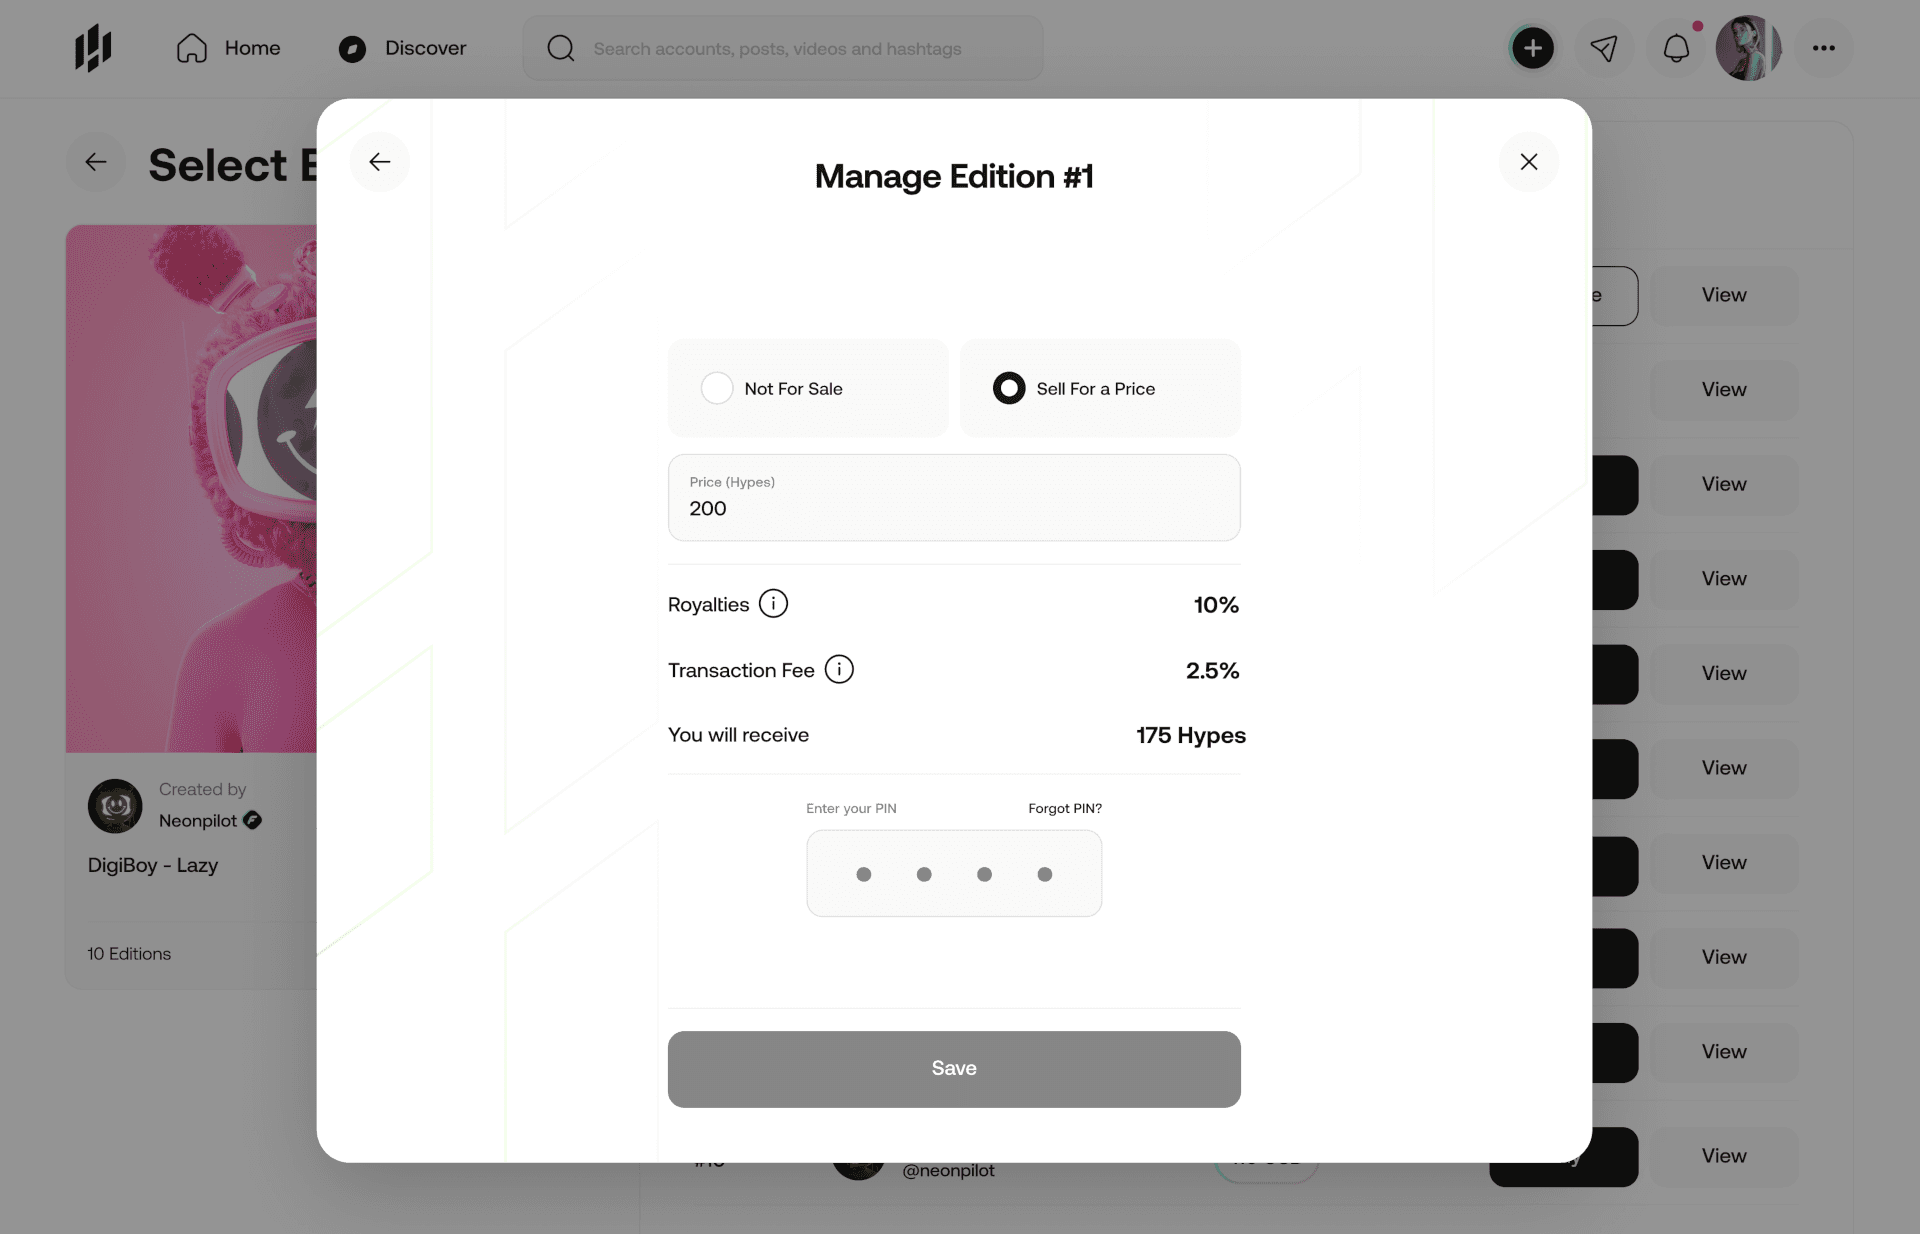 The pop up window once you’ve selected ‘manage’ allows you to set a price in Hypes, before entering your pin and saving the change. 